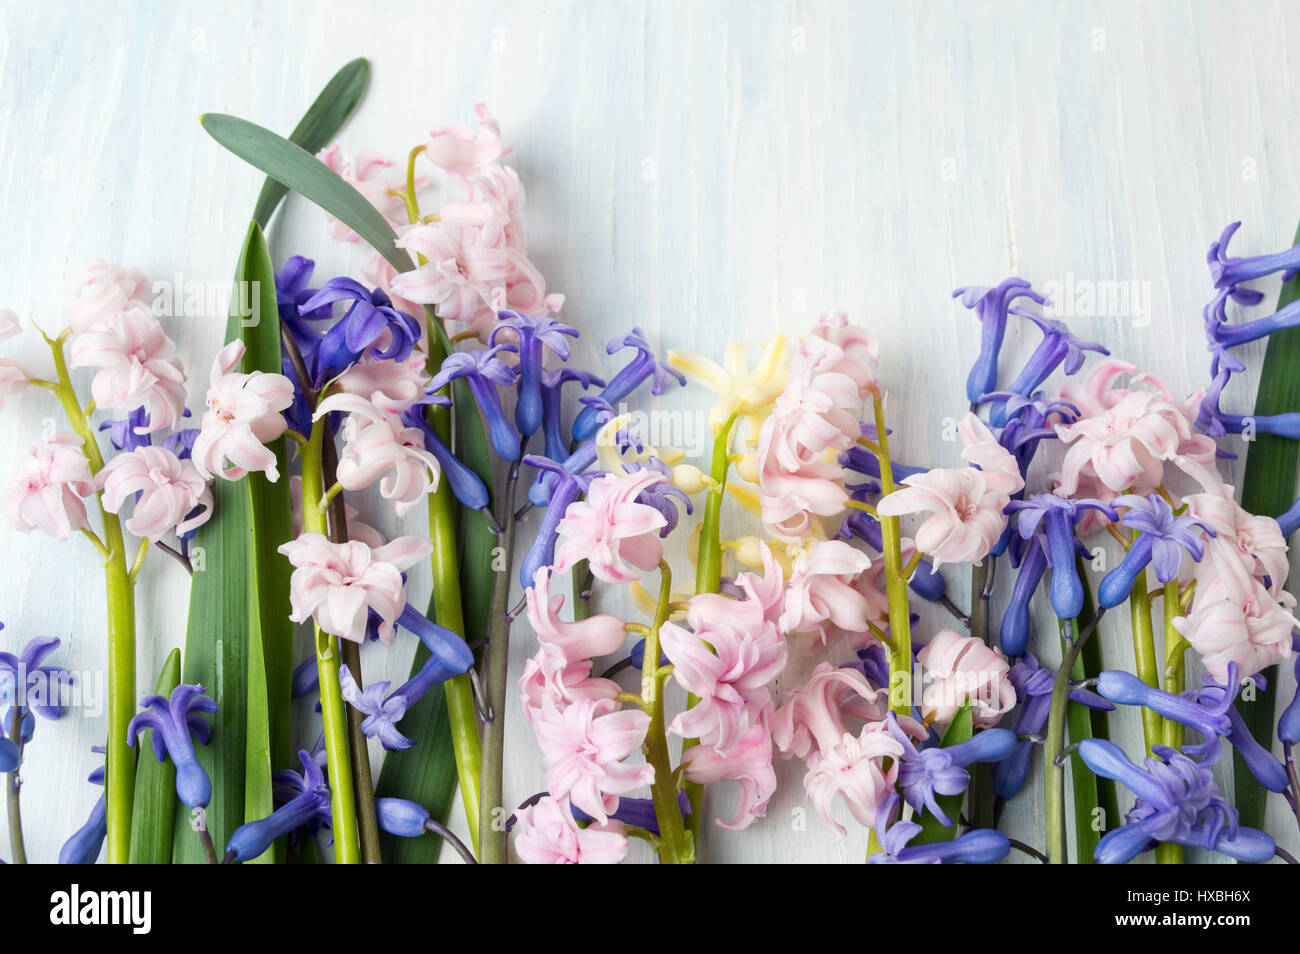 Mixed hyacinth flowers on a wooden table Stock Photo